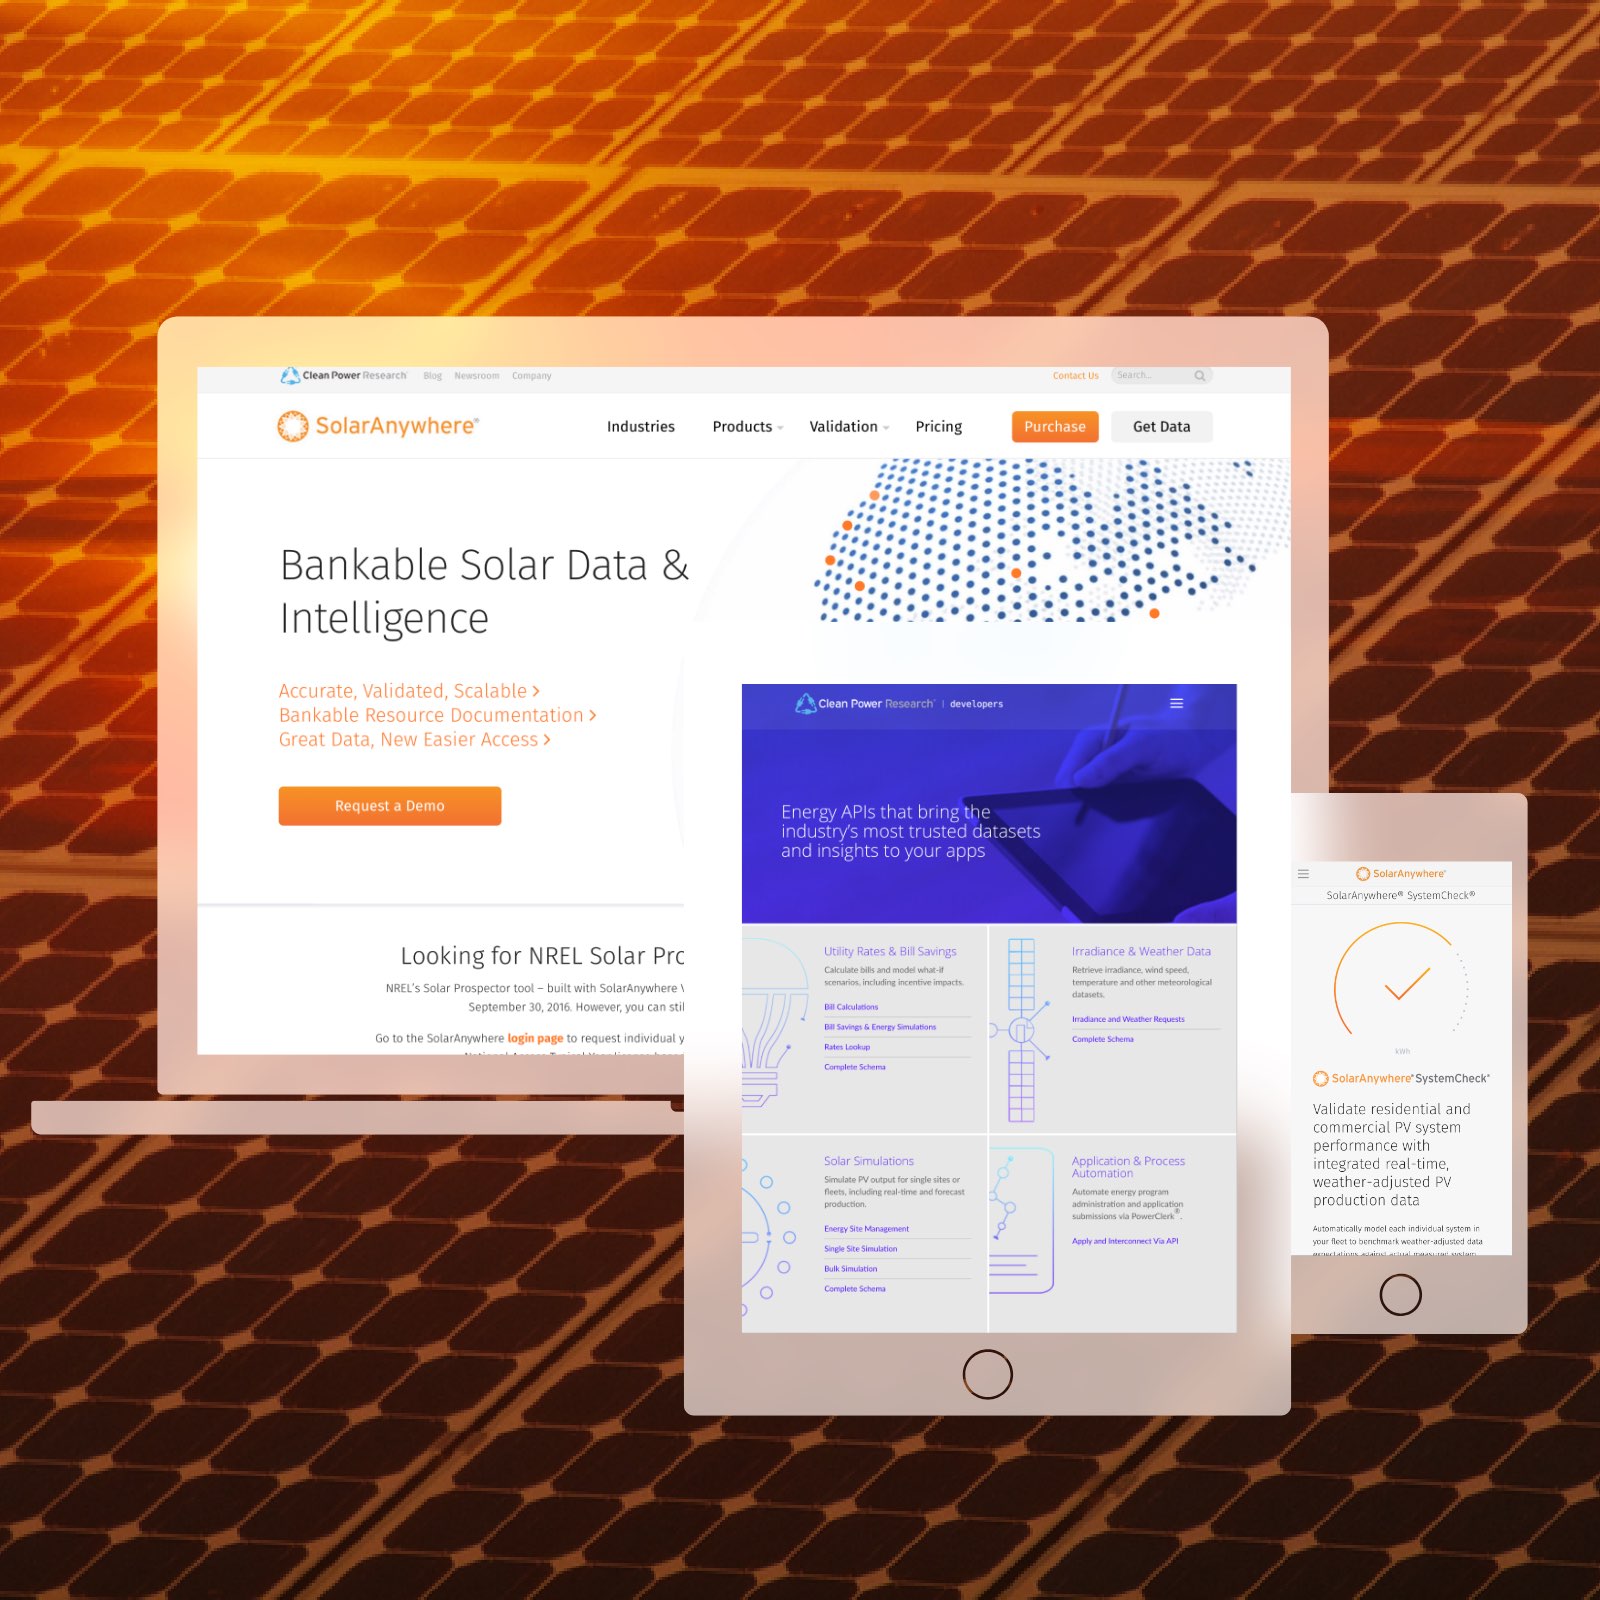 Teaser of the Clean Power Research and Solar Anywhere websites